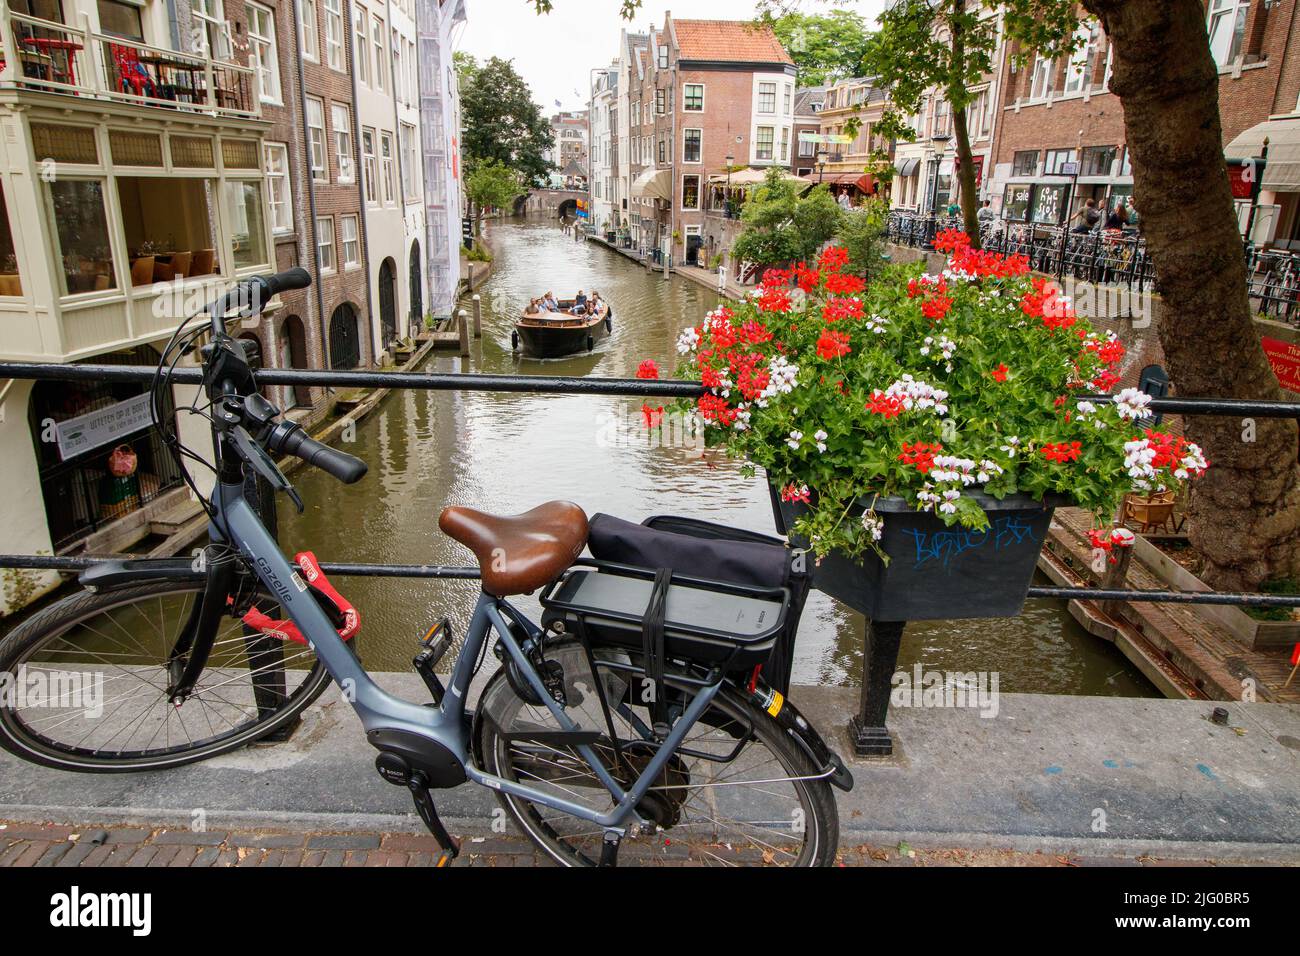 A scene along the canal waterway in the centre of views of Utrecht in Holland. Stock Photo